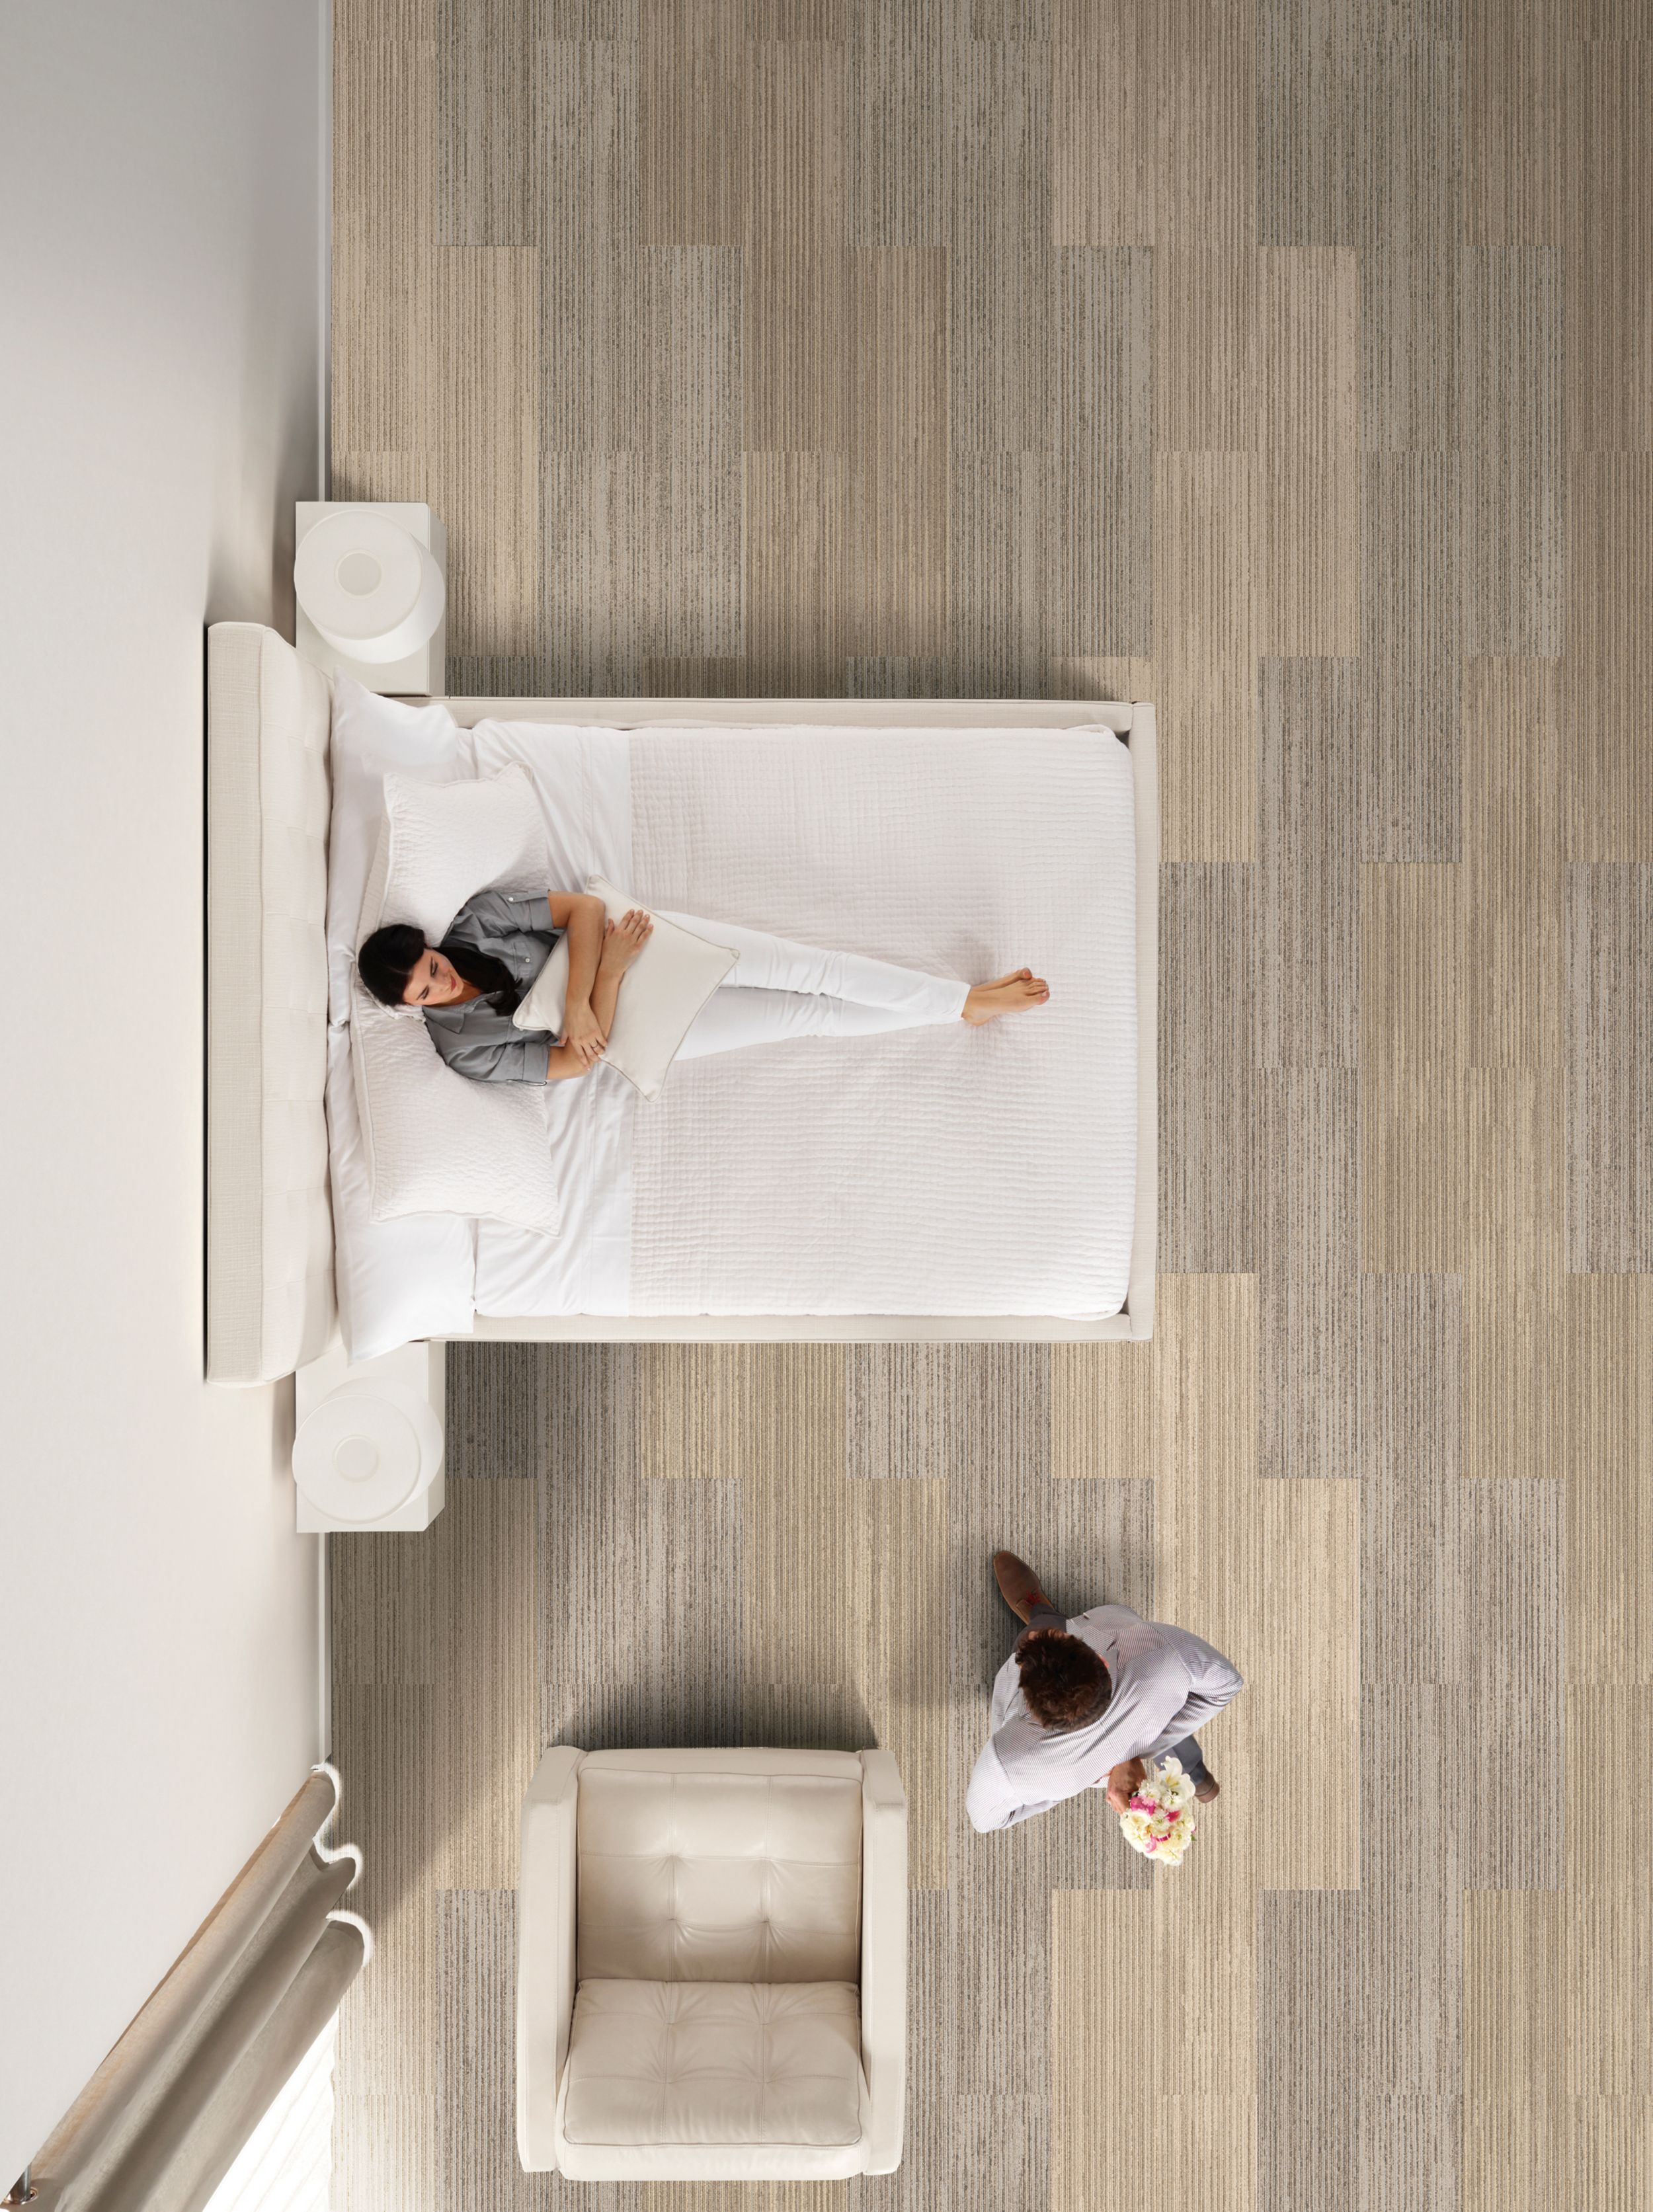 Interface SWTS 110 plank carpet tile in hotel guest room with woman and child imagen número 7